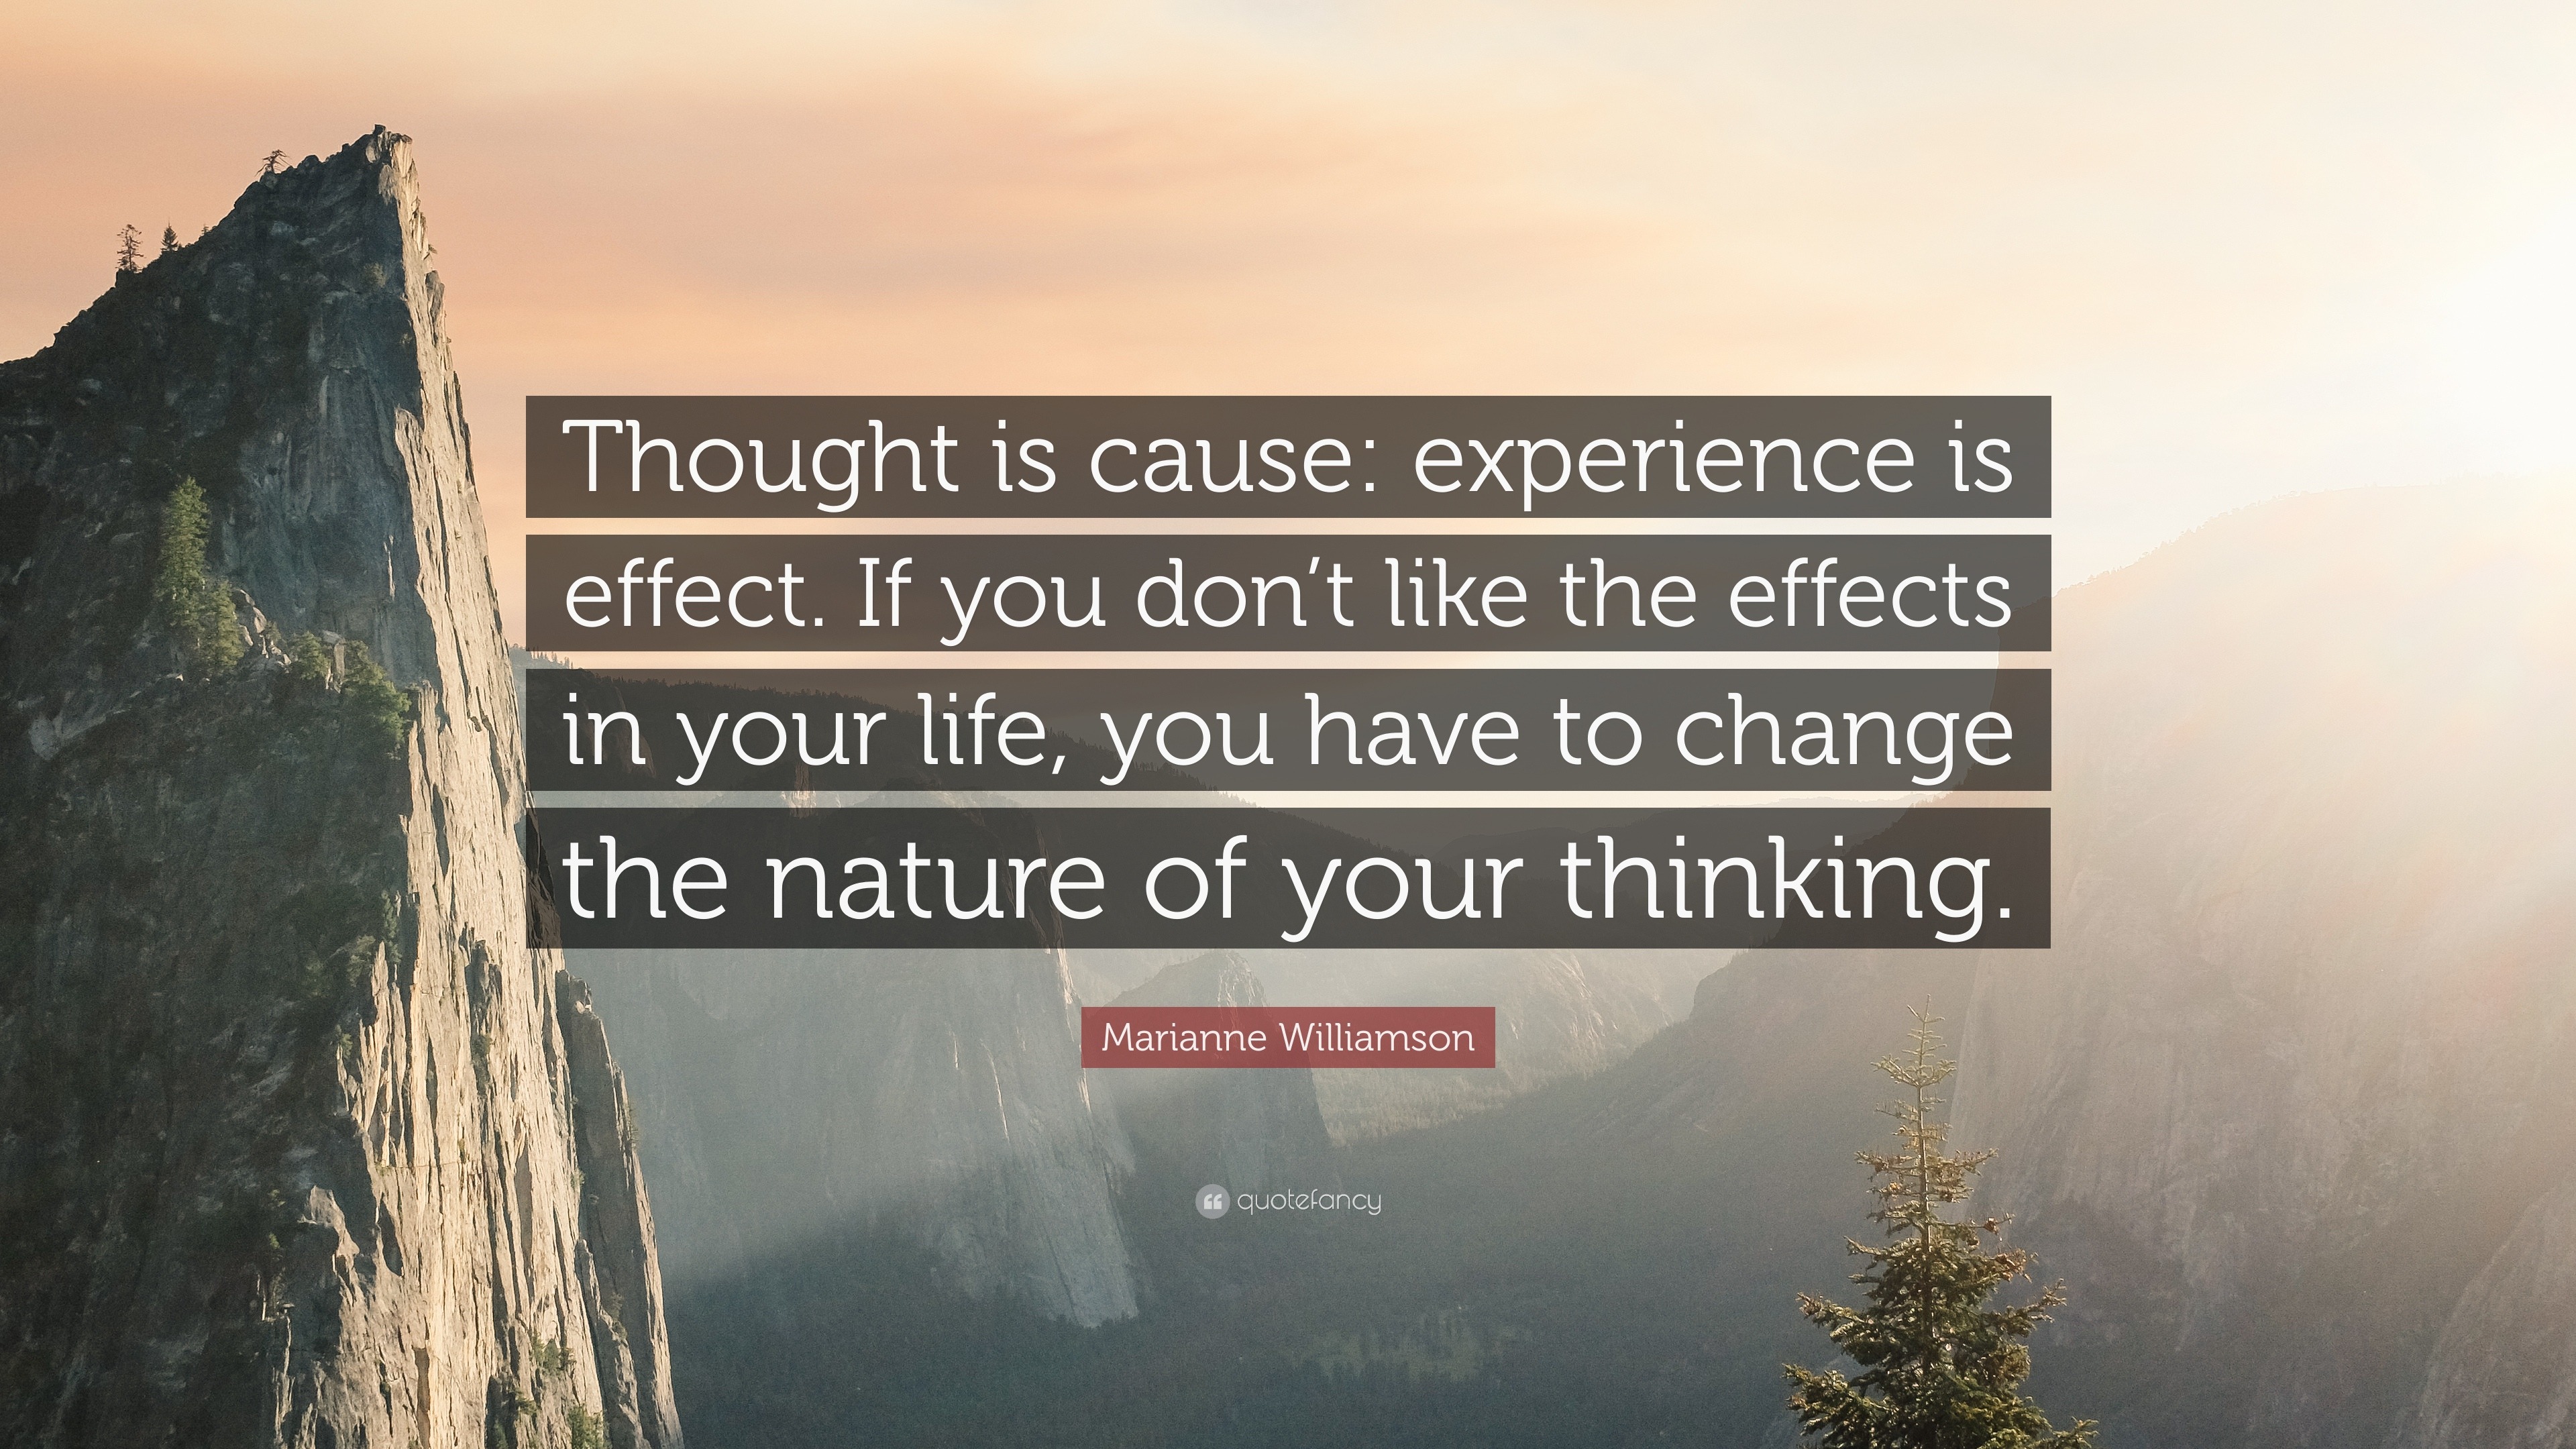 Marianne Williamson Quote: “Thought is cause: experience is effect. If ...